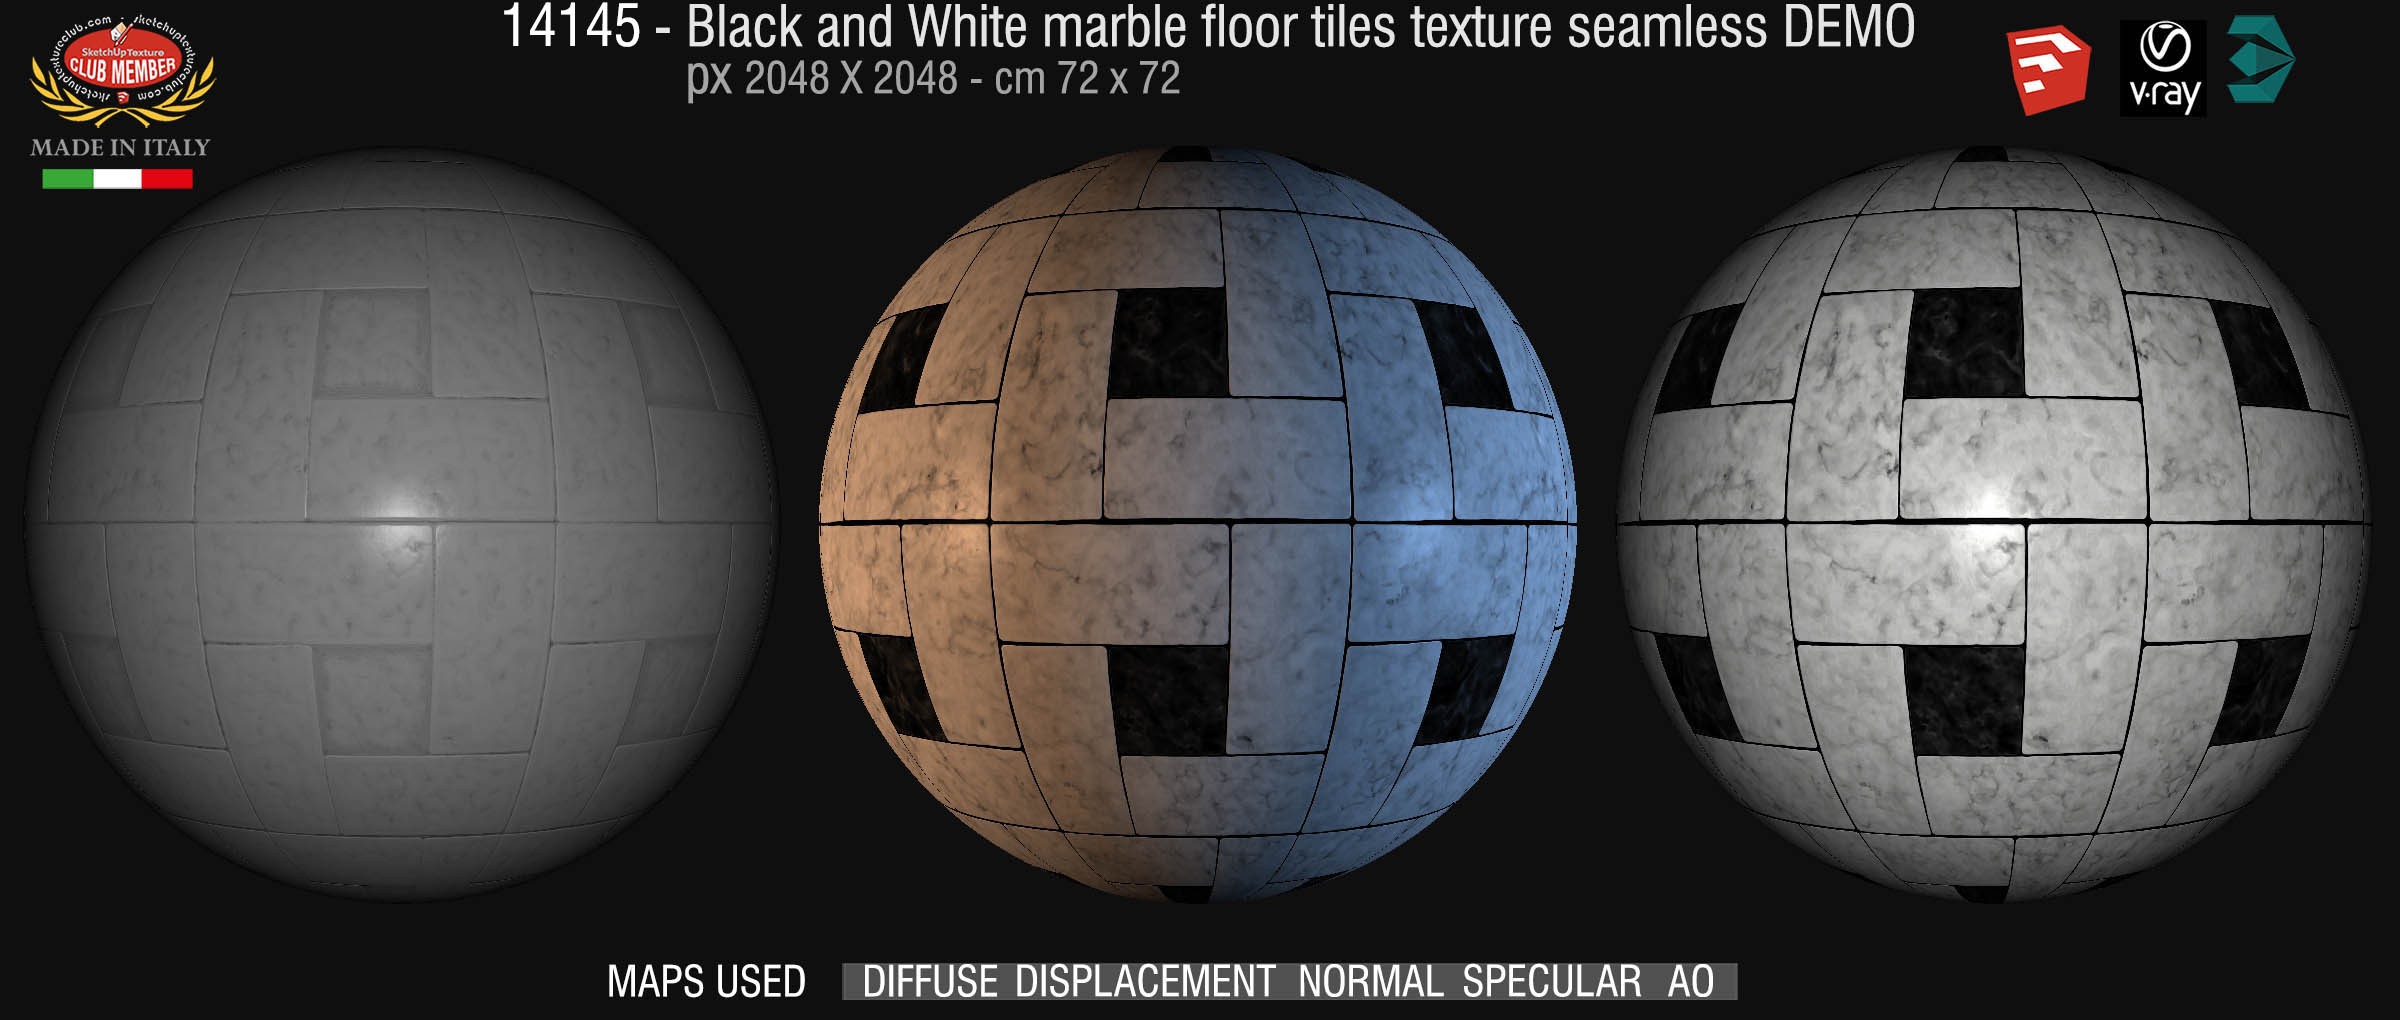 14145 Black and white marble tile texture seamless + maps DEMO